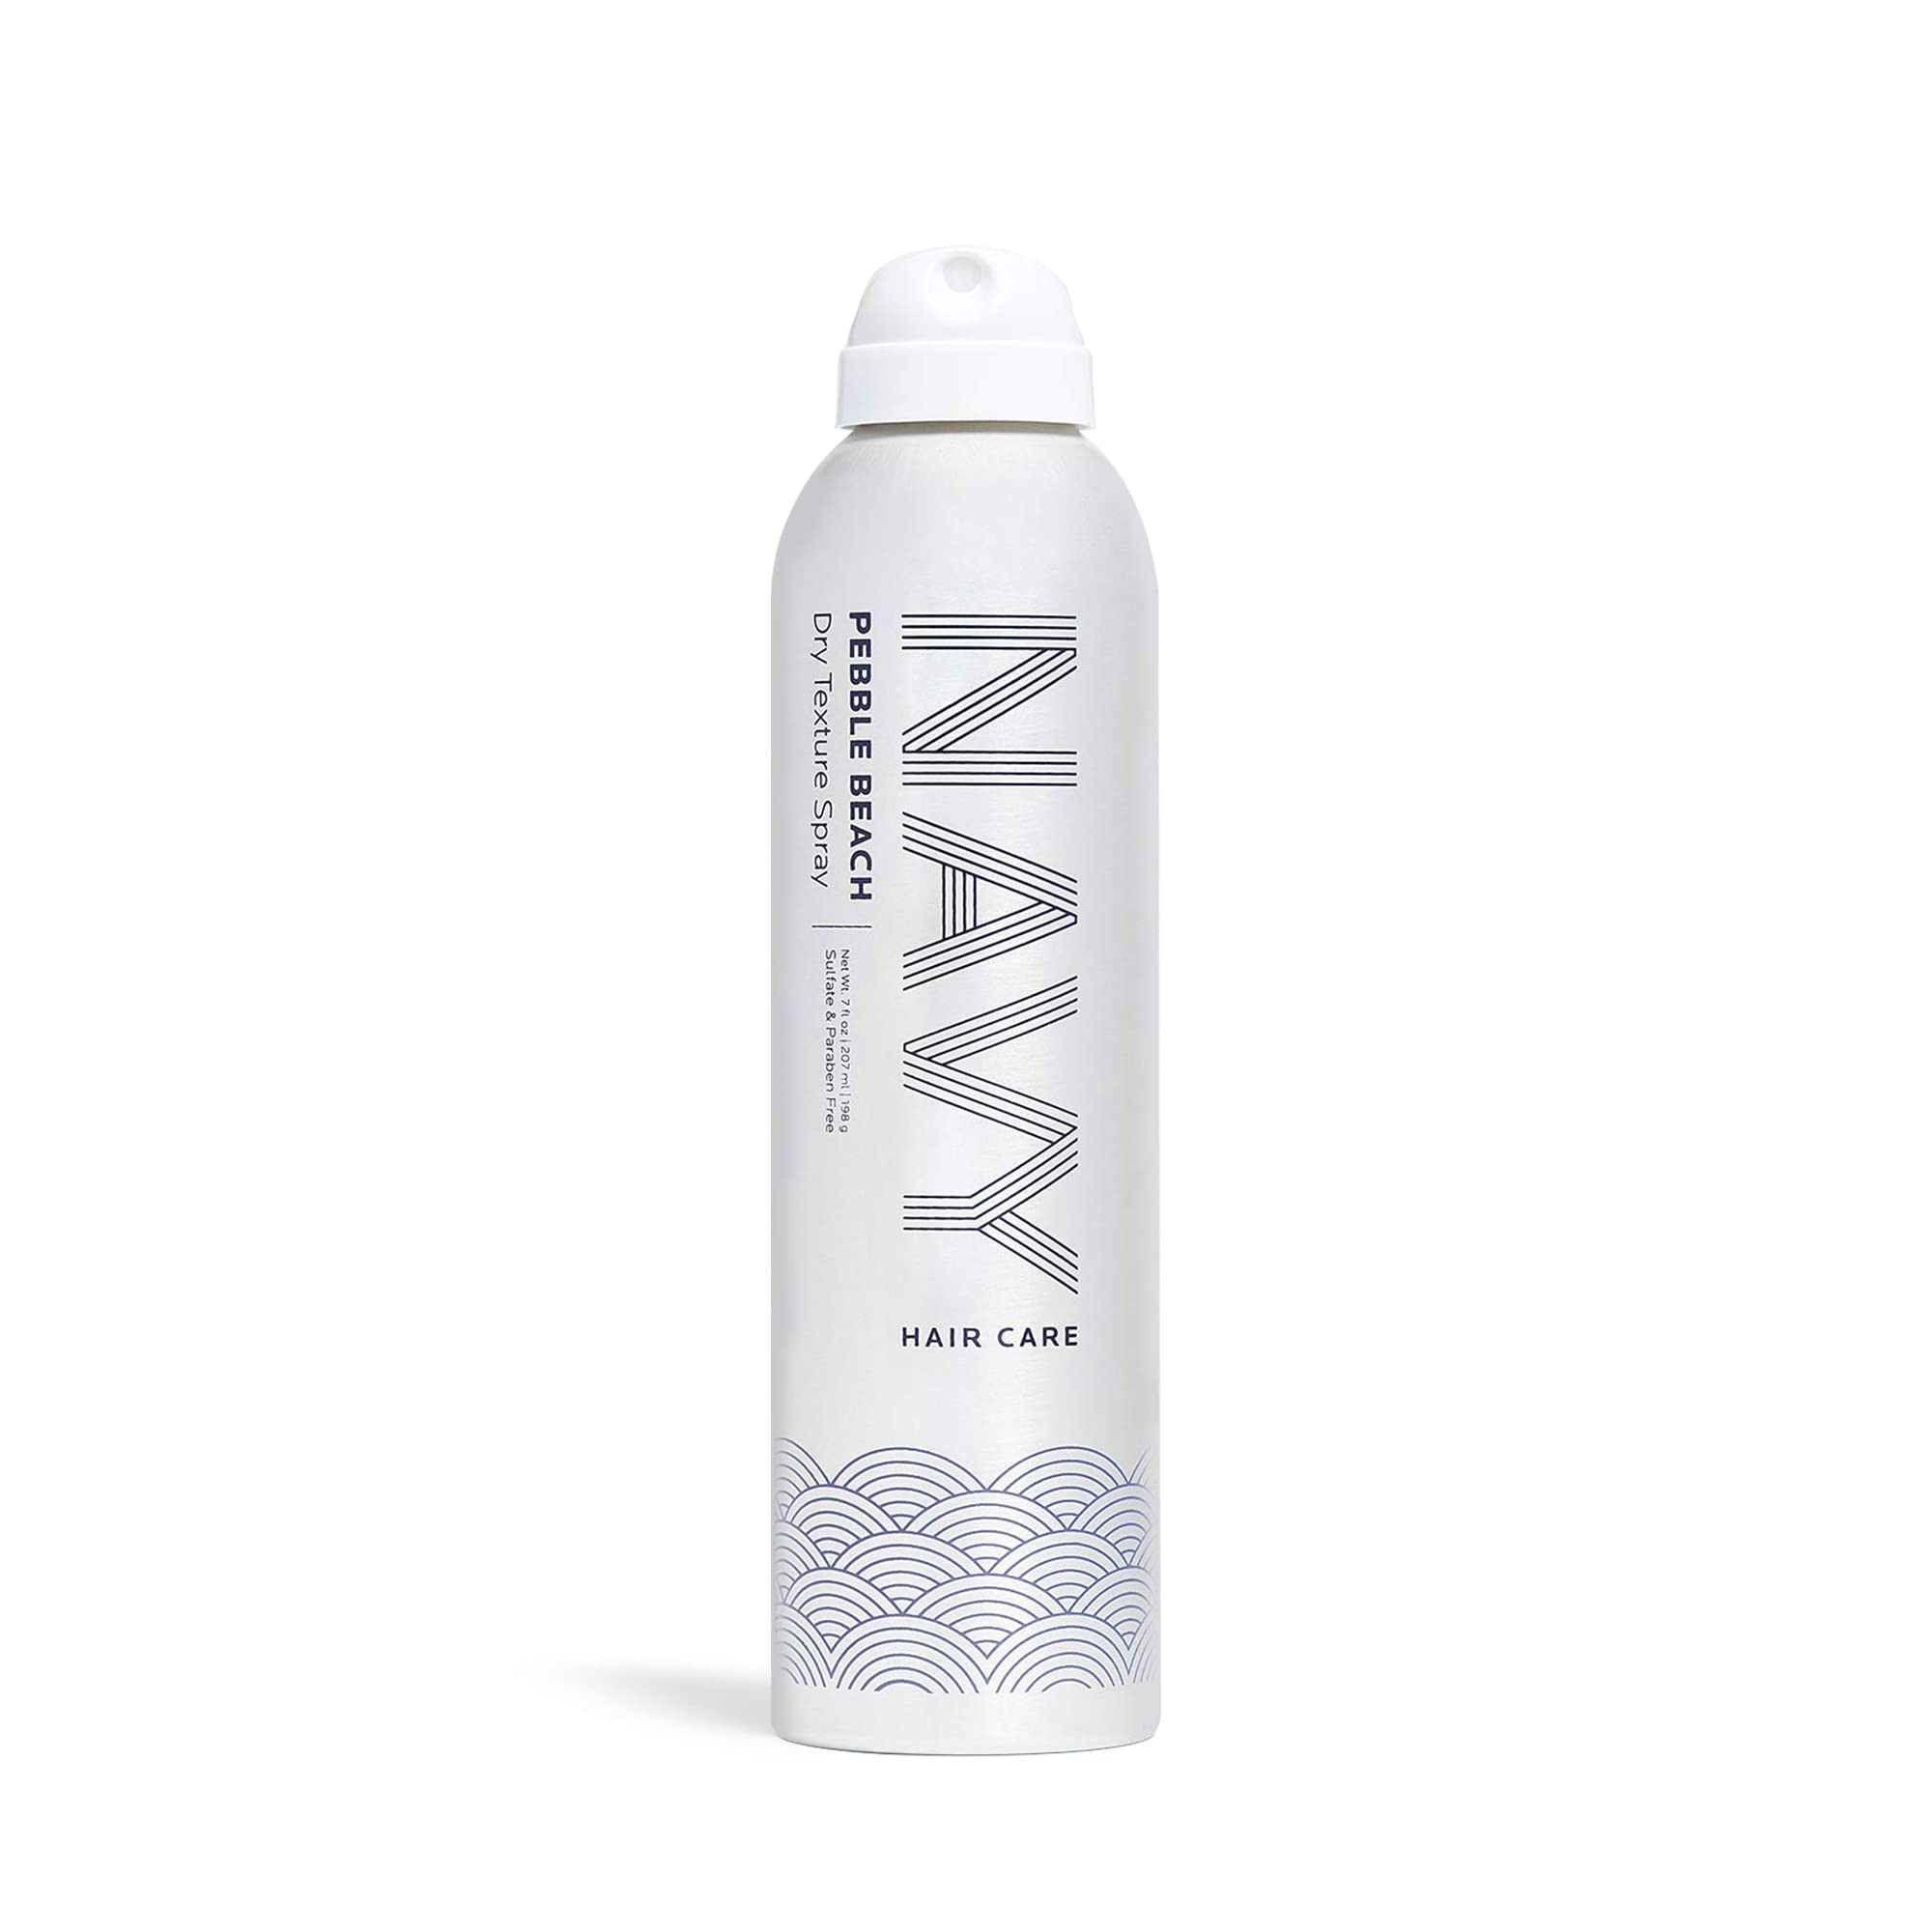 Navy Spray Styling Products